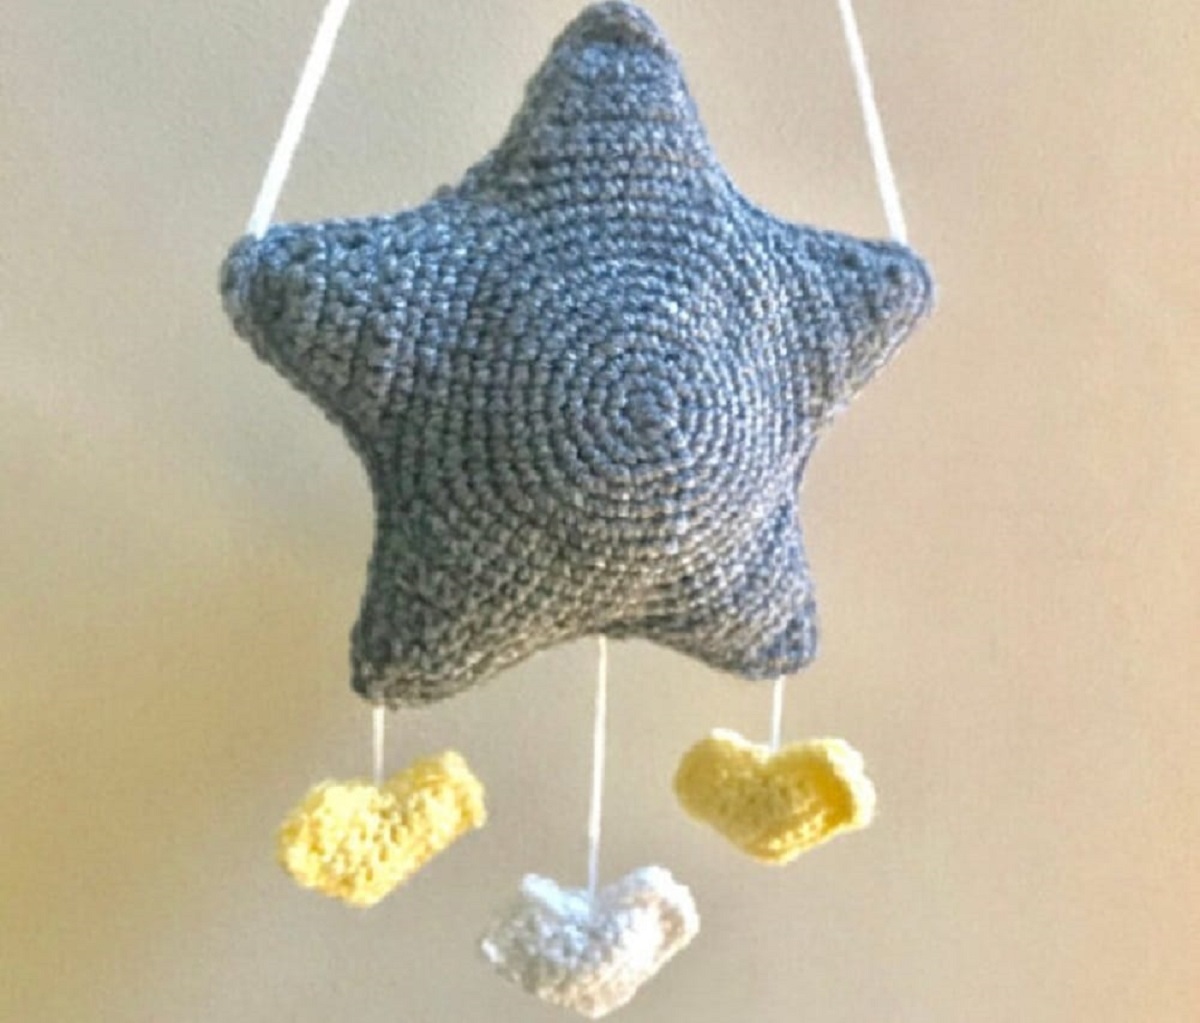 A stuffed crochet blue star mobile with three yellow birds hanging from the bottom of the star on a beige background.